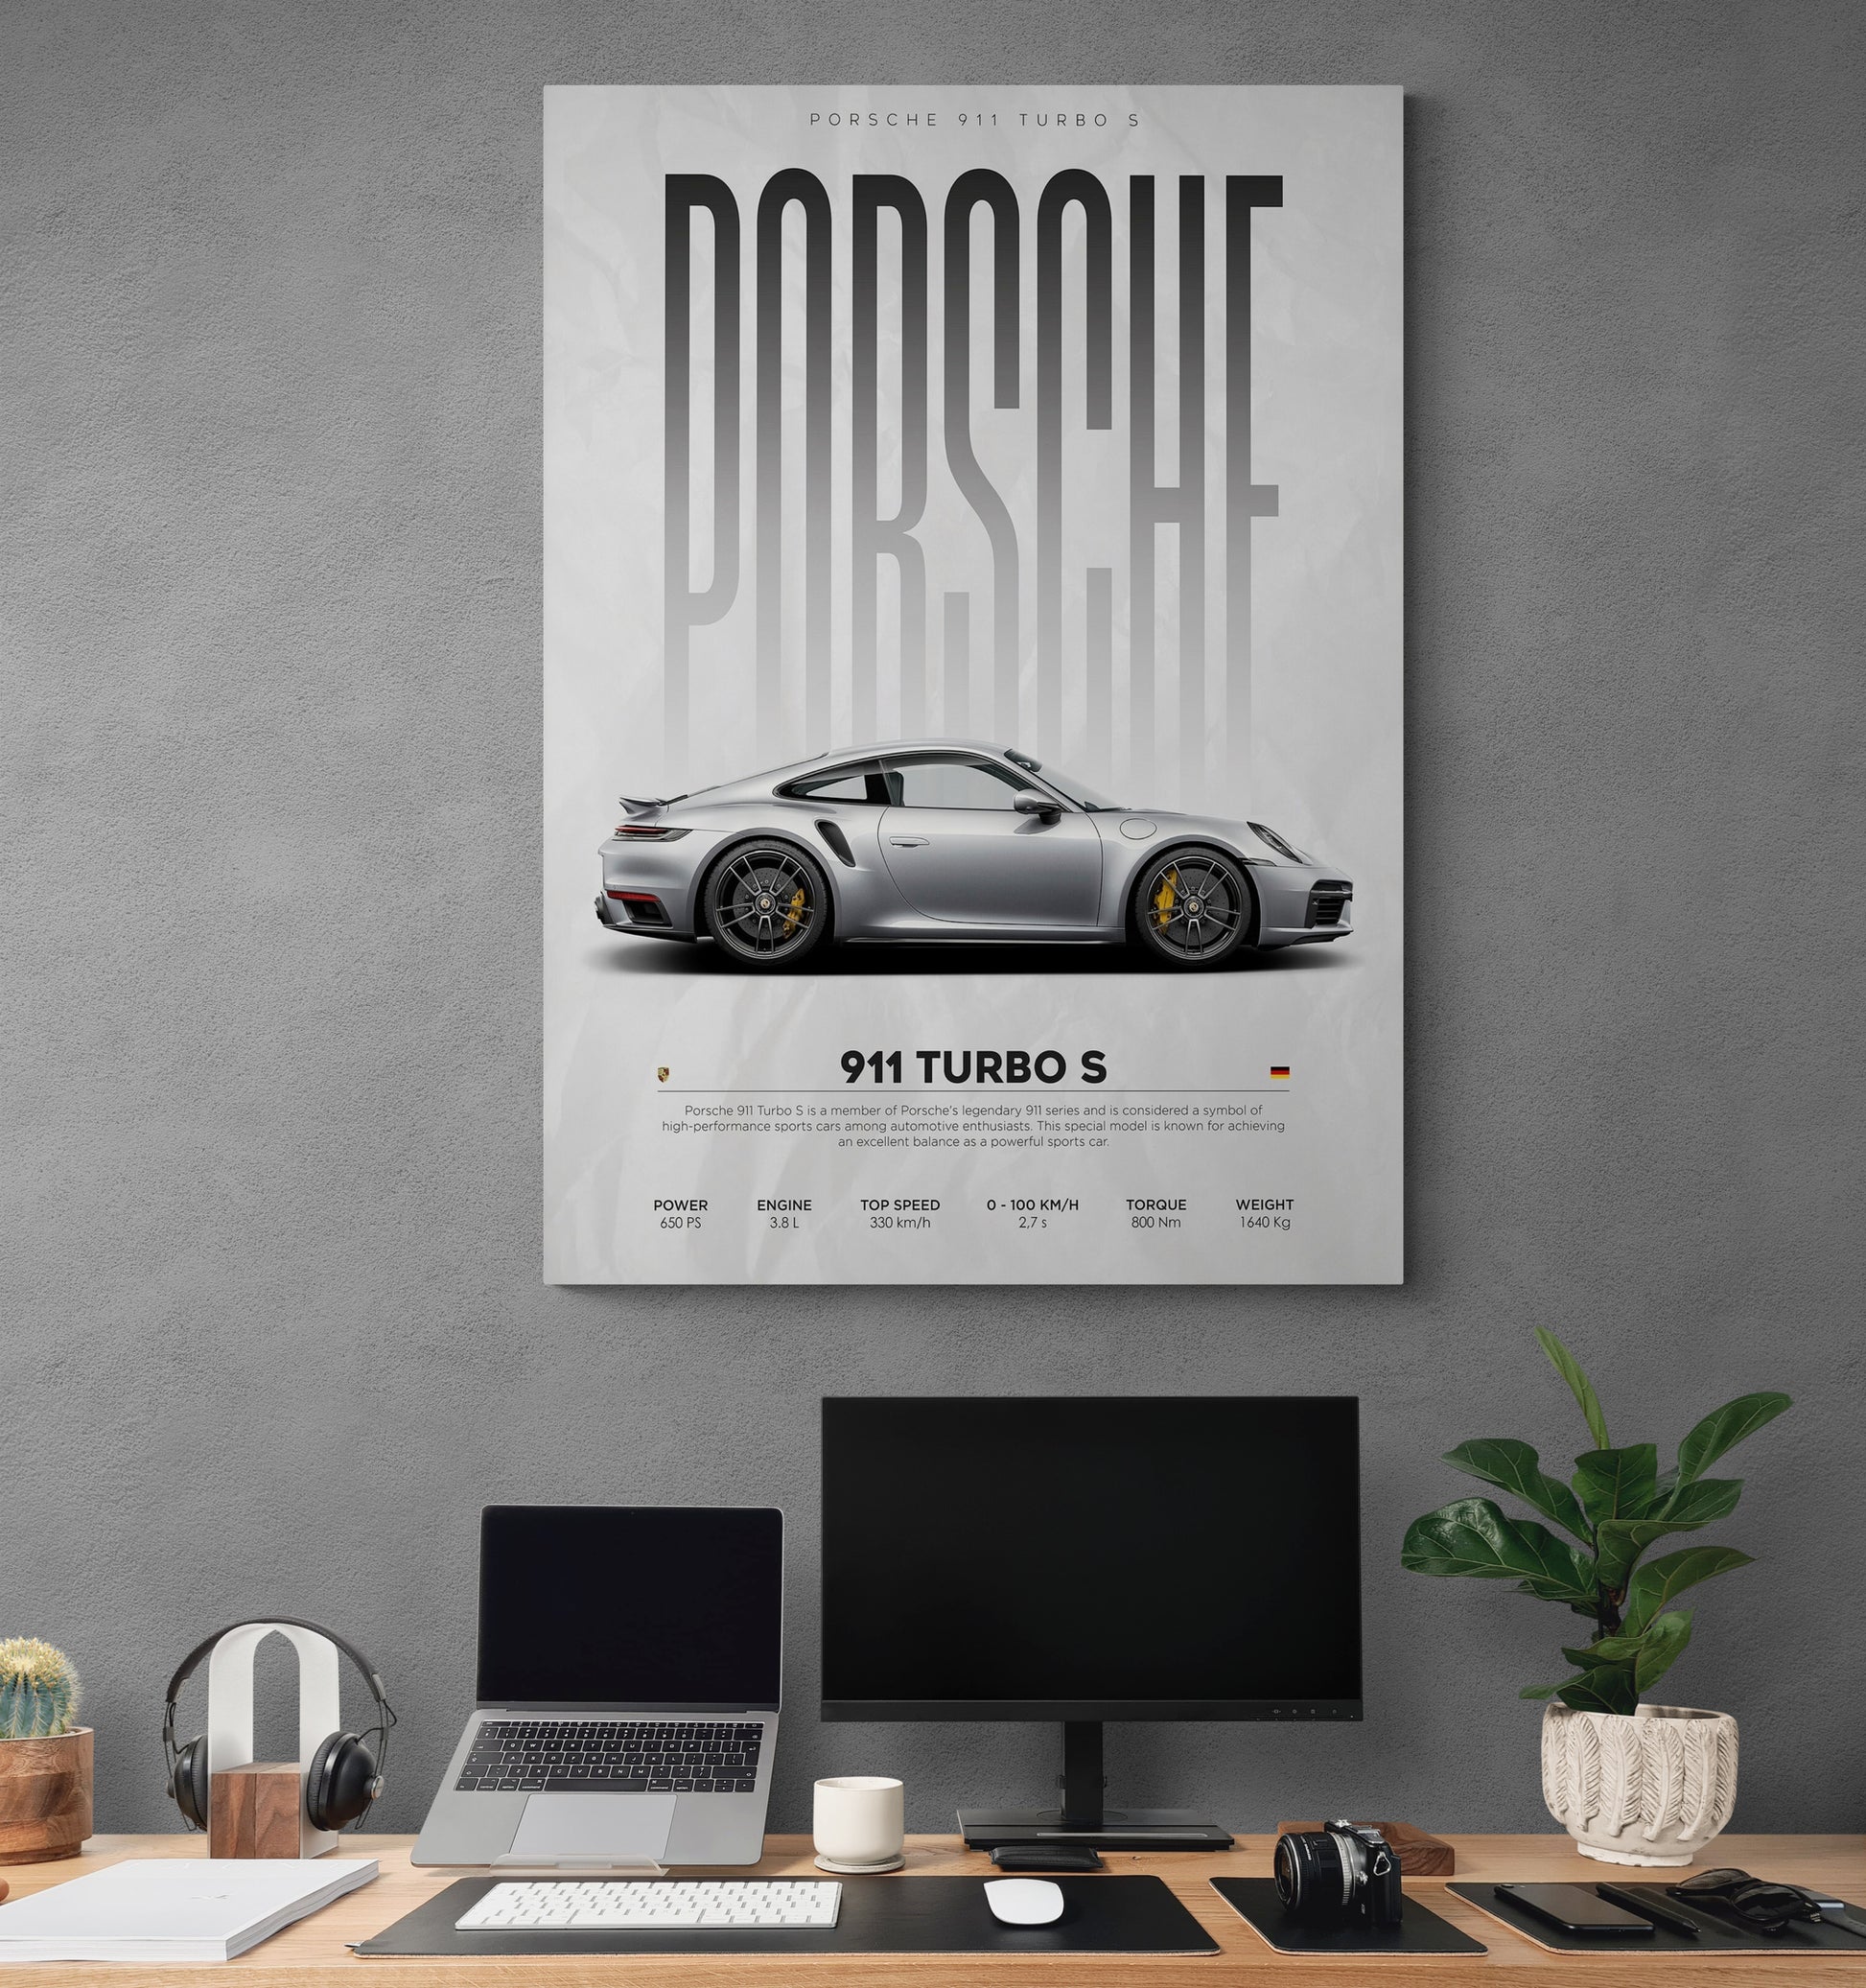 Elevate your bedroom interior design with Porsche car artwork. Explore our collection featuring Porsche 911. Find the perfect 911 car canvases at Essential Walls.